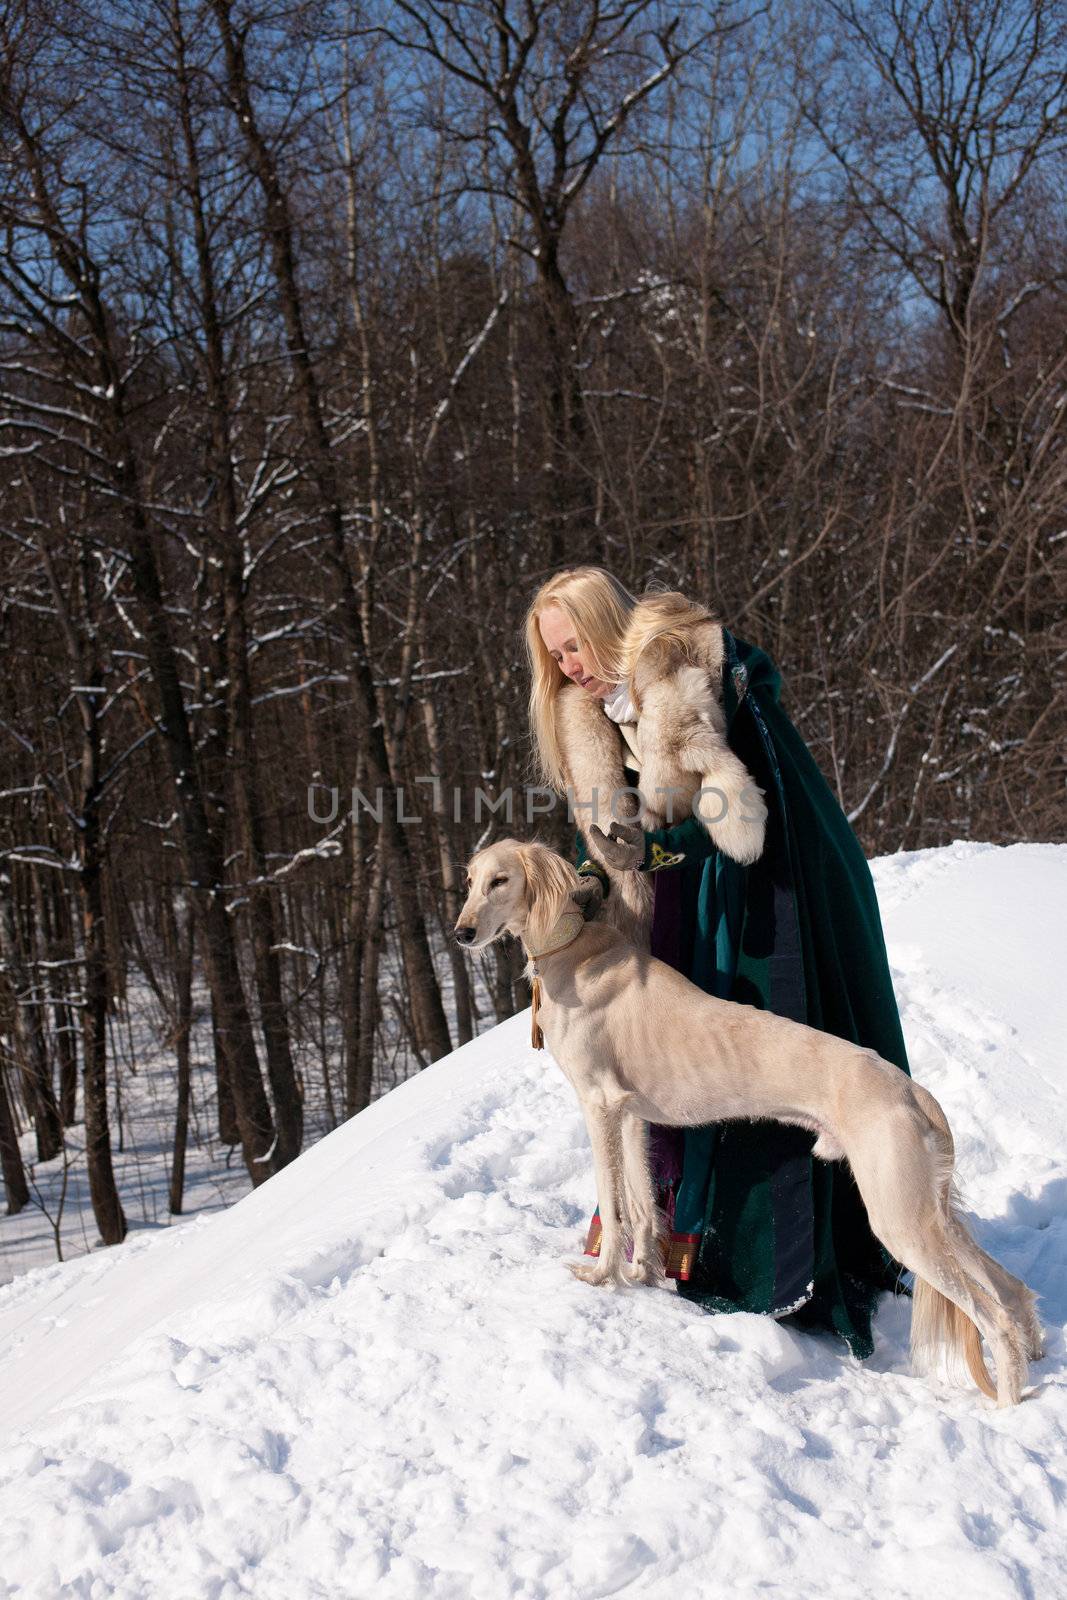 A blonde girl and a standing white saluki on snow
